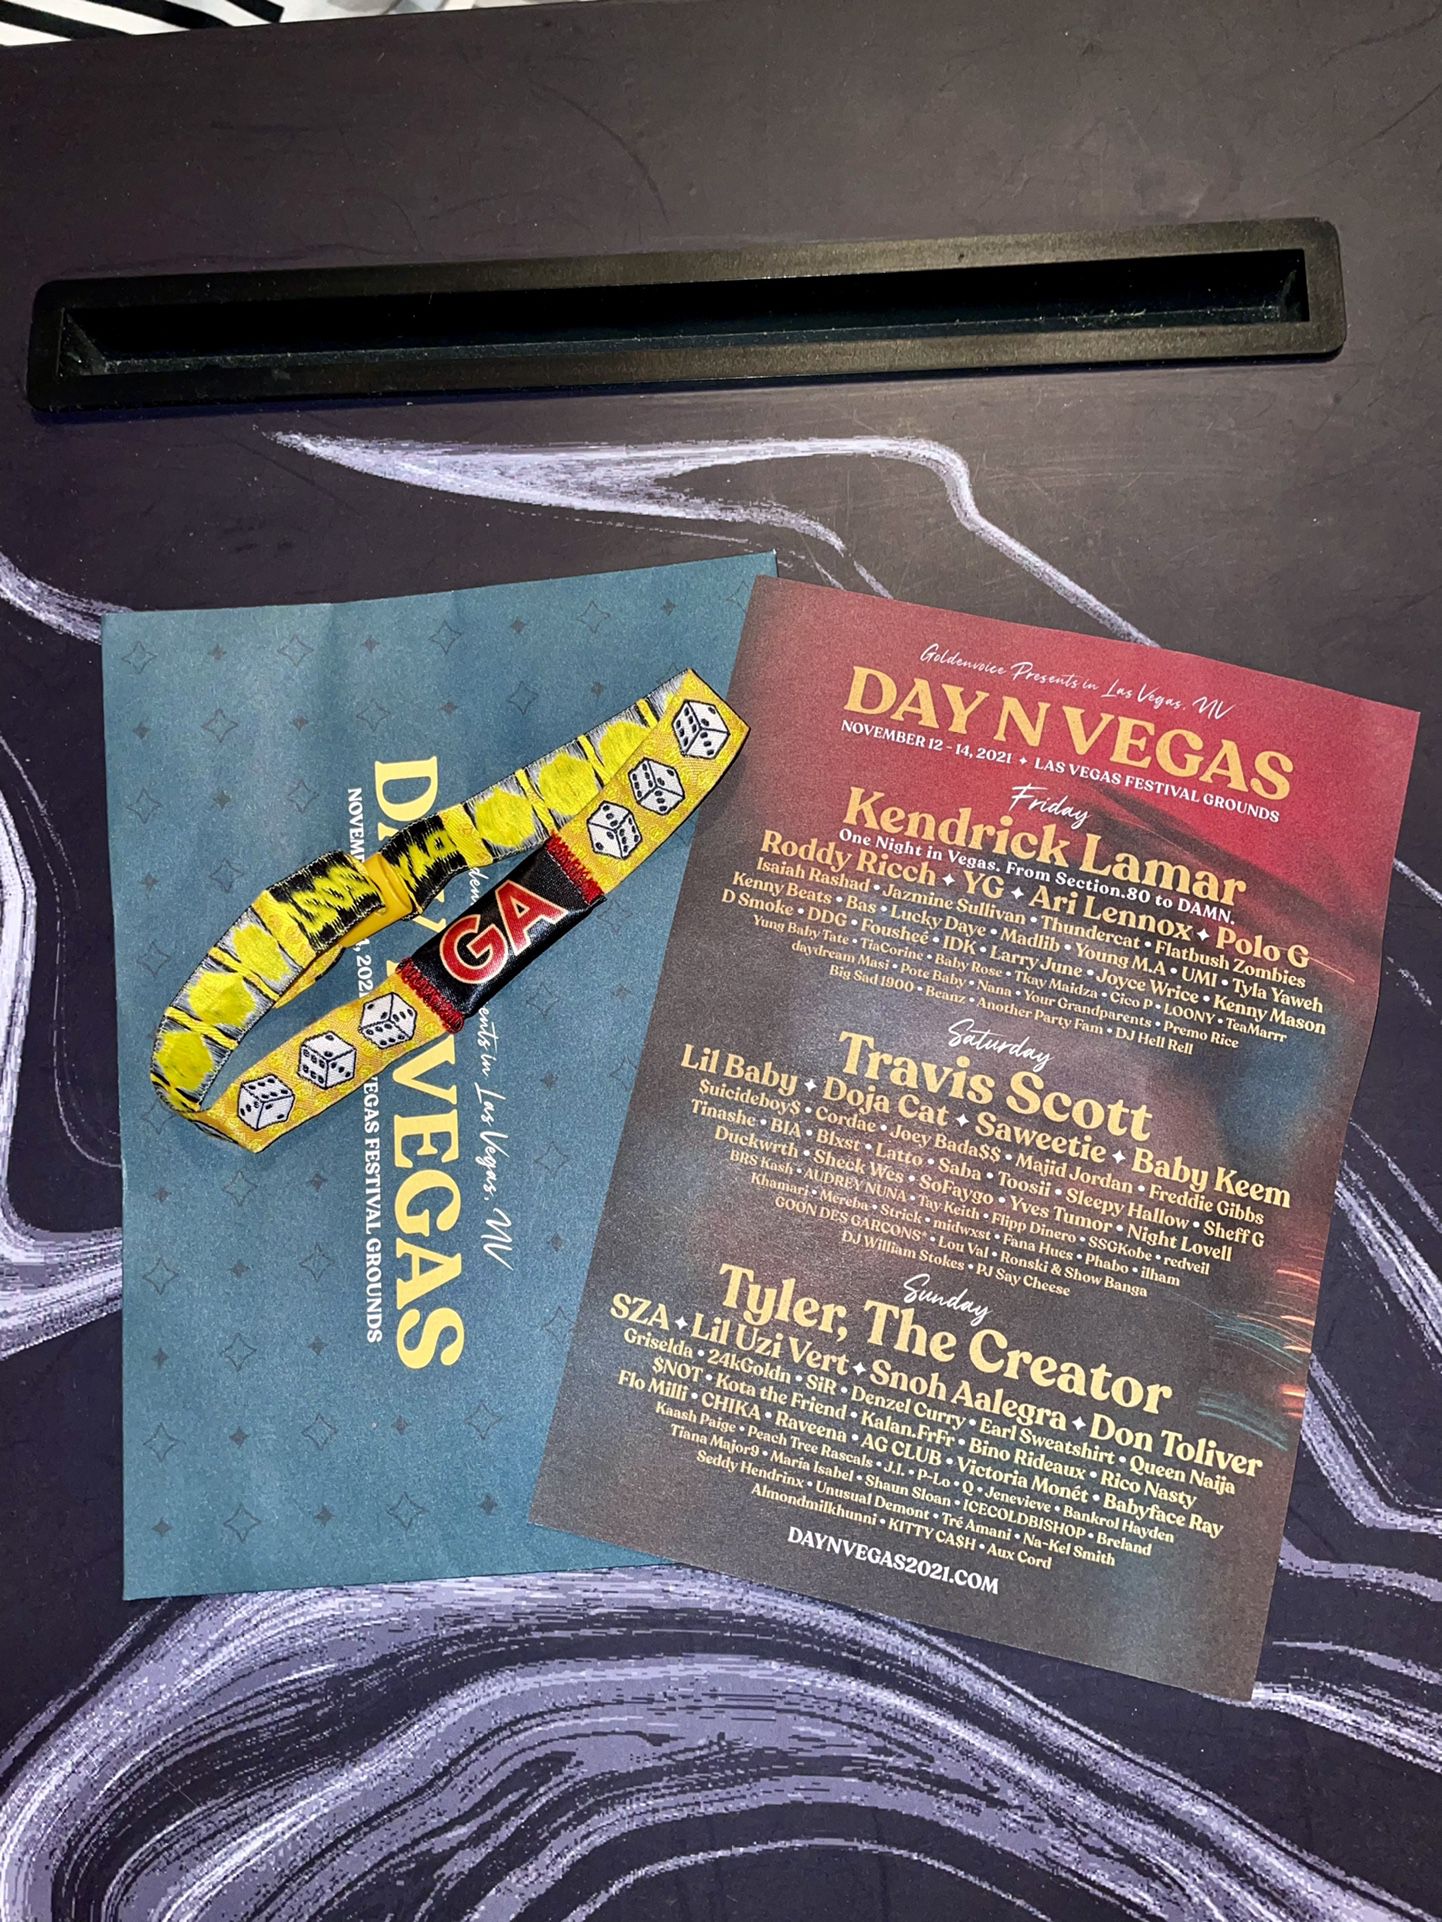 Day N Vegas Concert Tickets (2 General Admission Wristbands)